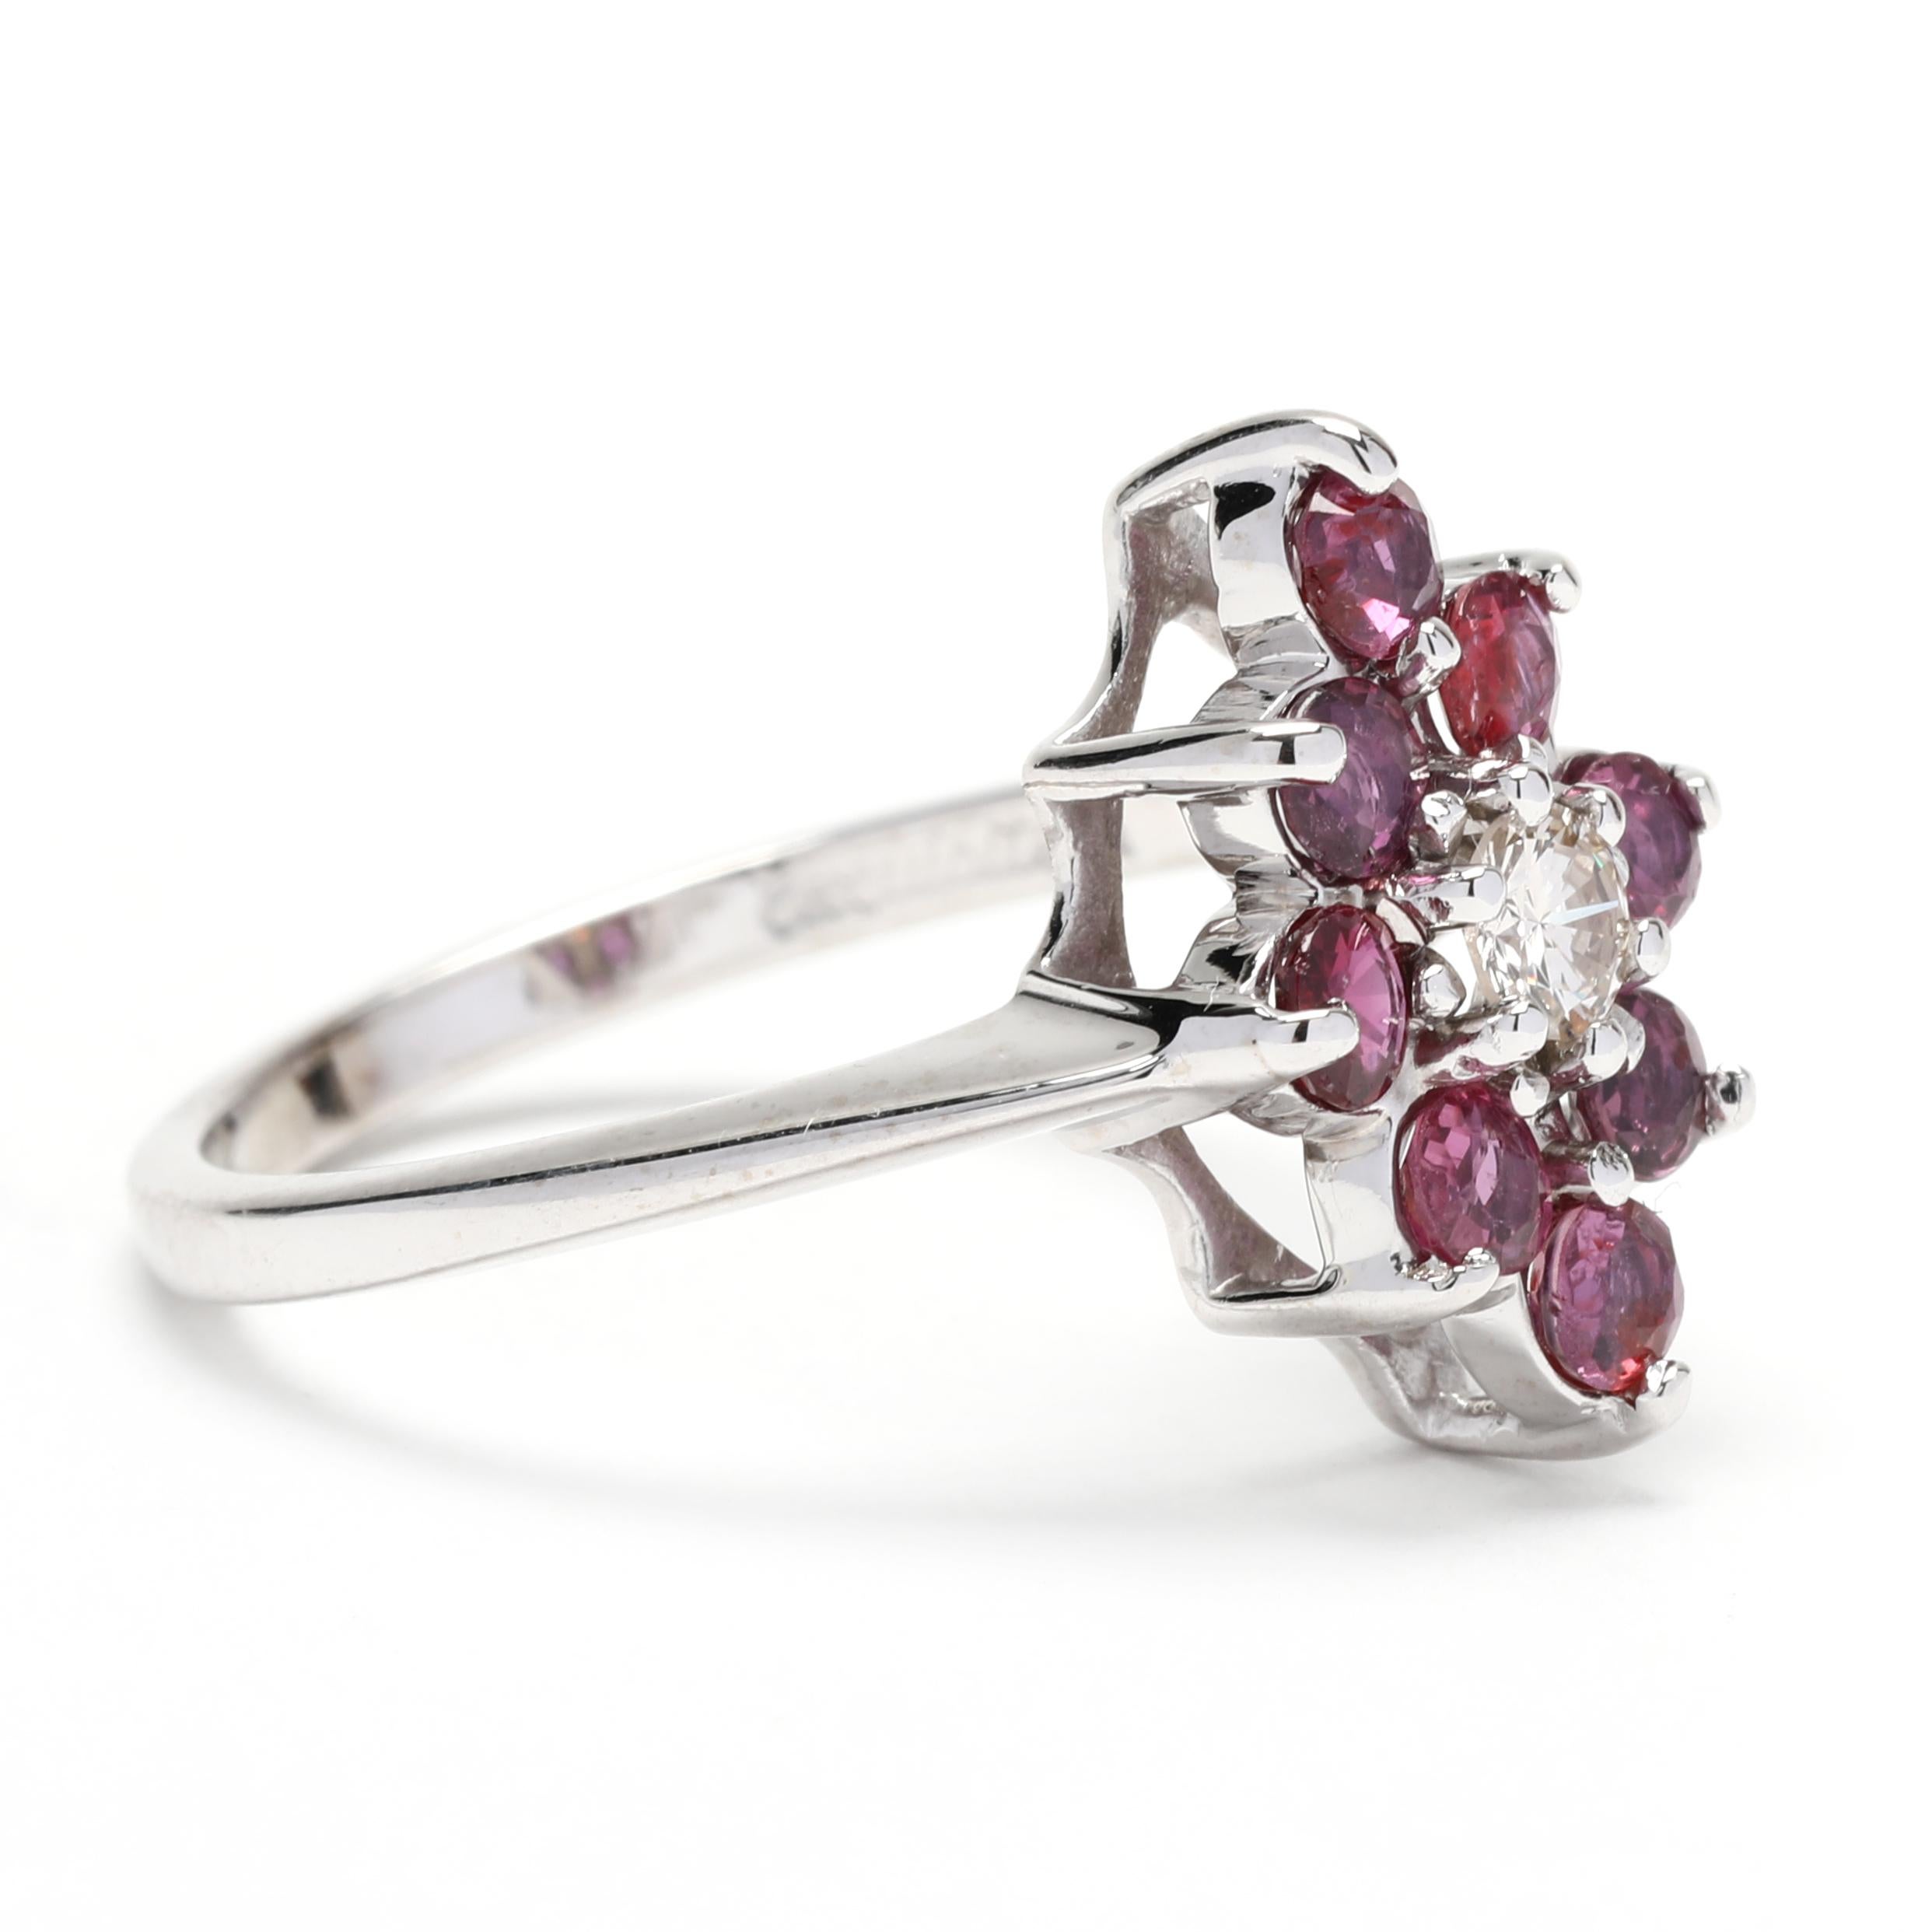 This beautiful ruby and diamond navette ring is the perfect way to add a hint of color to your jewelry collection! Crafted in 14k white gold and featuring 1.15 carats of beautiful rubies and marquise diamonds, this ring is perfect for someone born